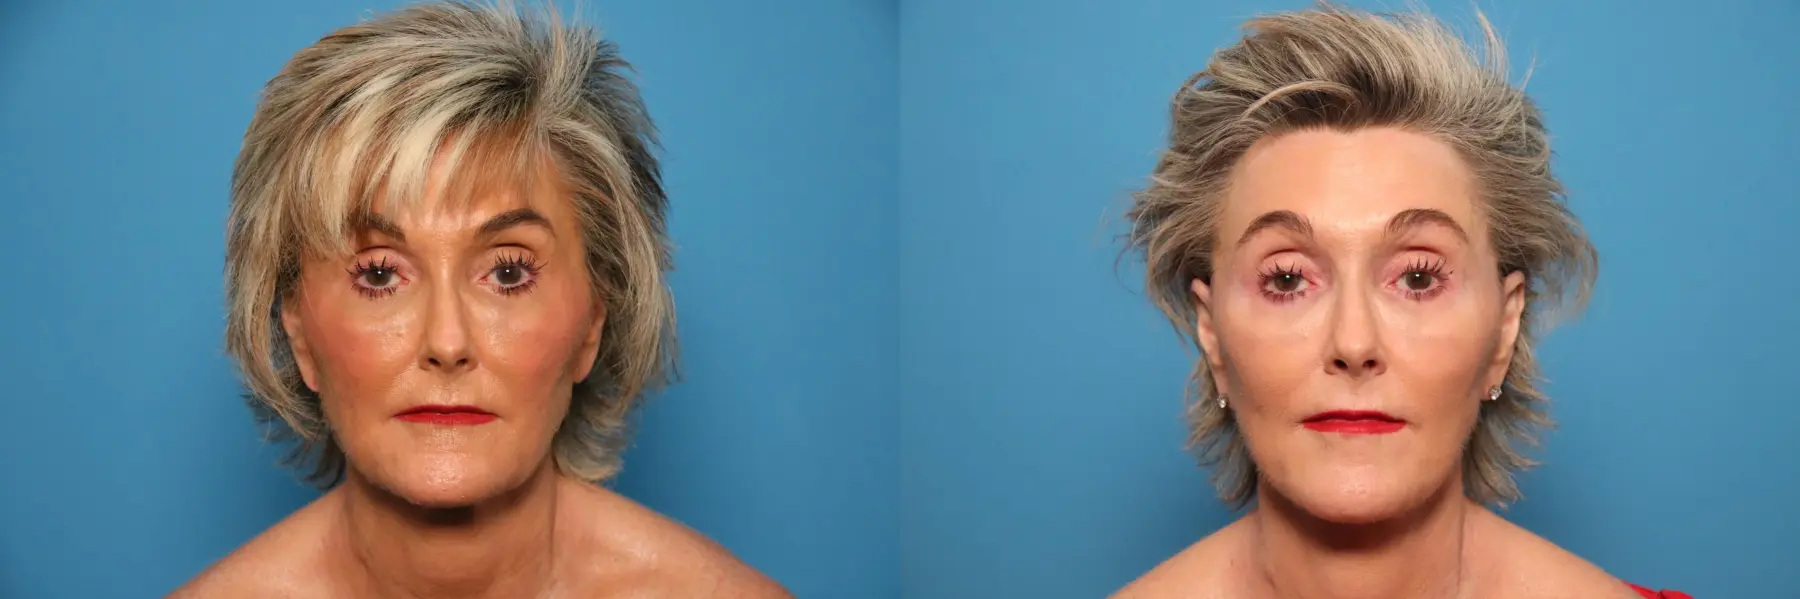 Facelift/Mini Facelift: Patient 6 - Before and After  